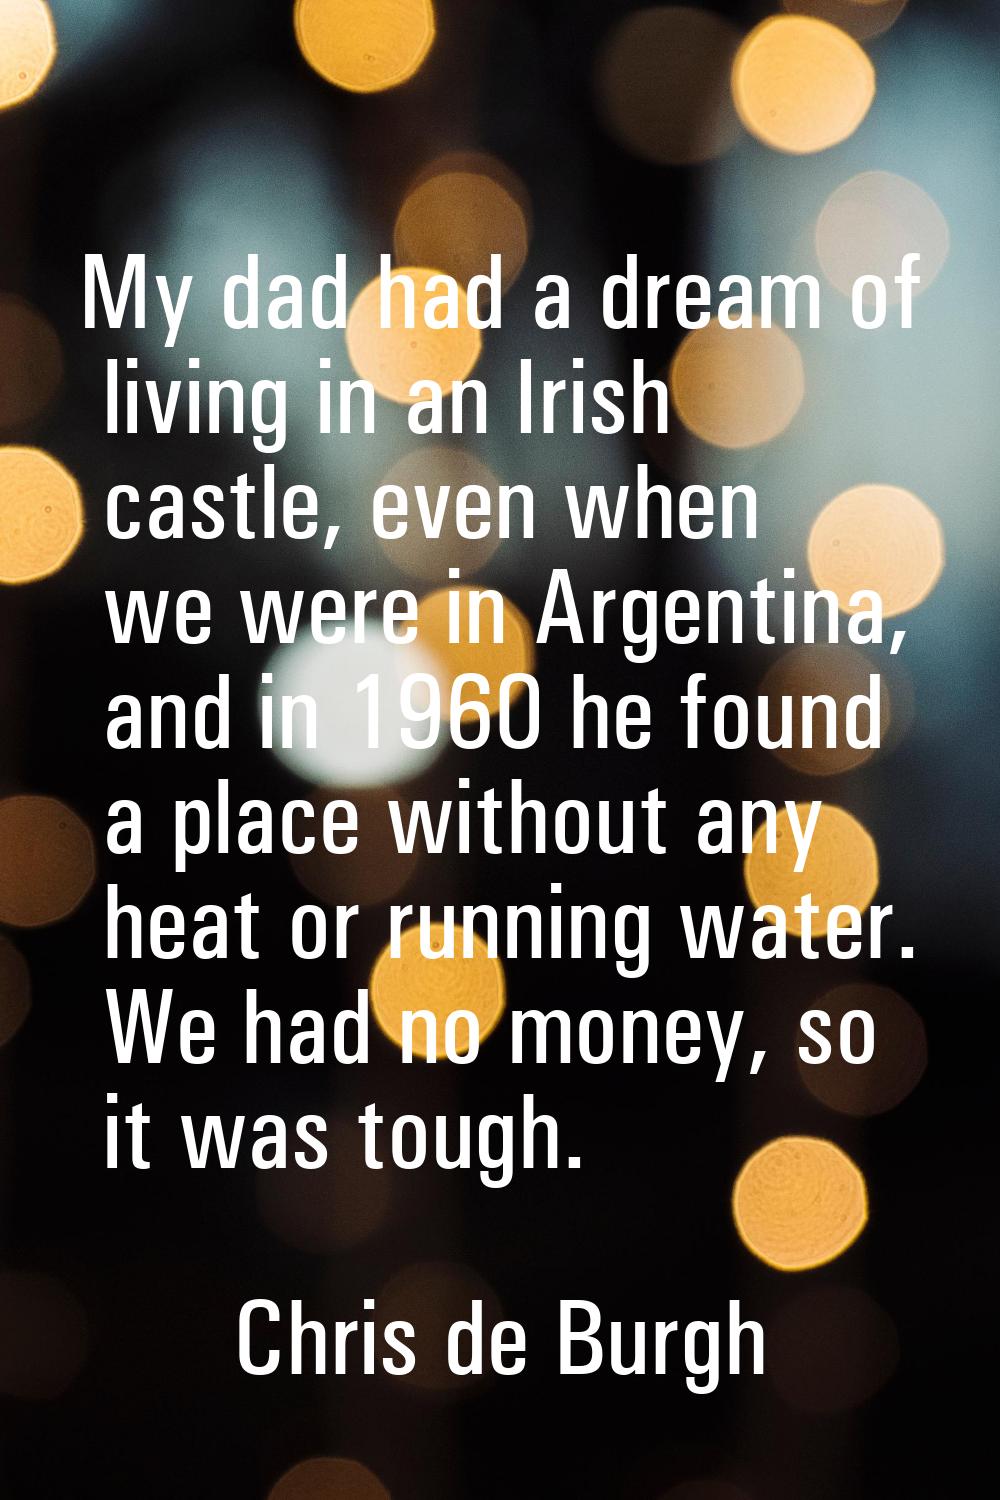 My dad had a dream of living in an Irish castle, even when we were in Argentina, and in 1960 he fou